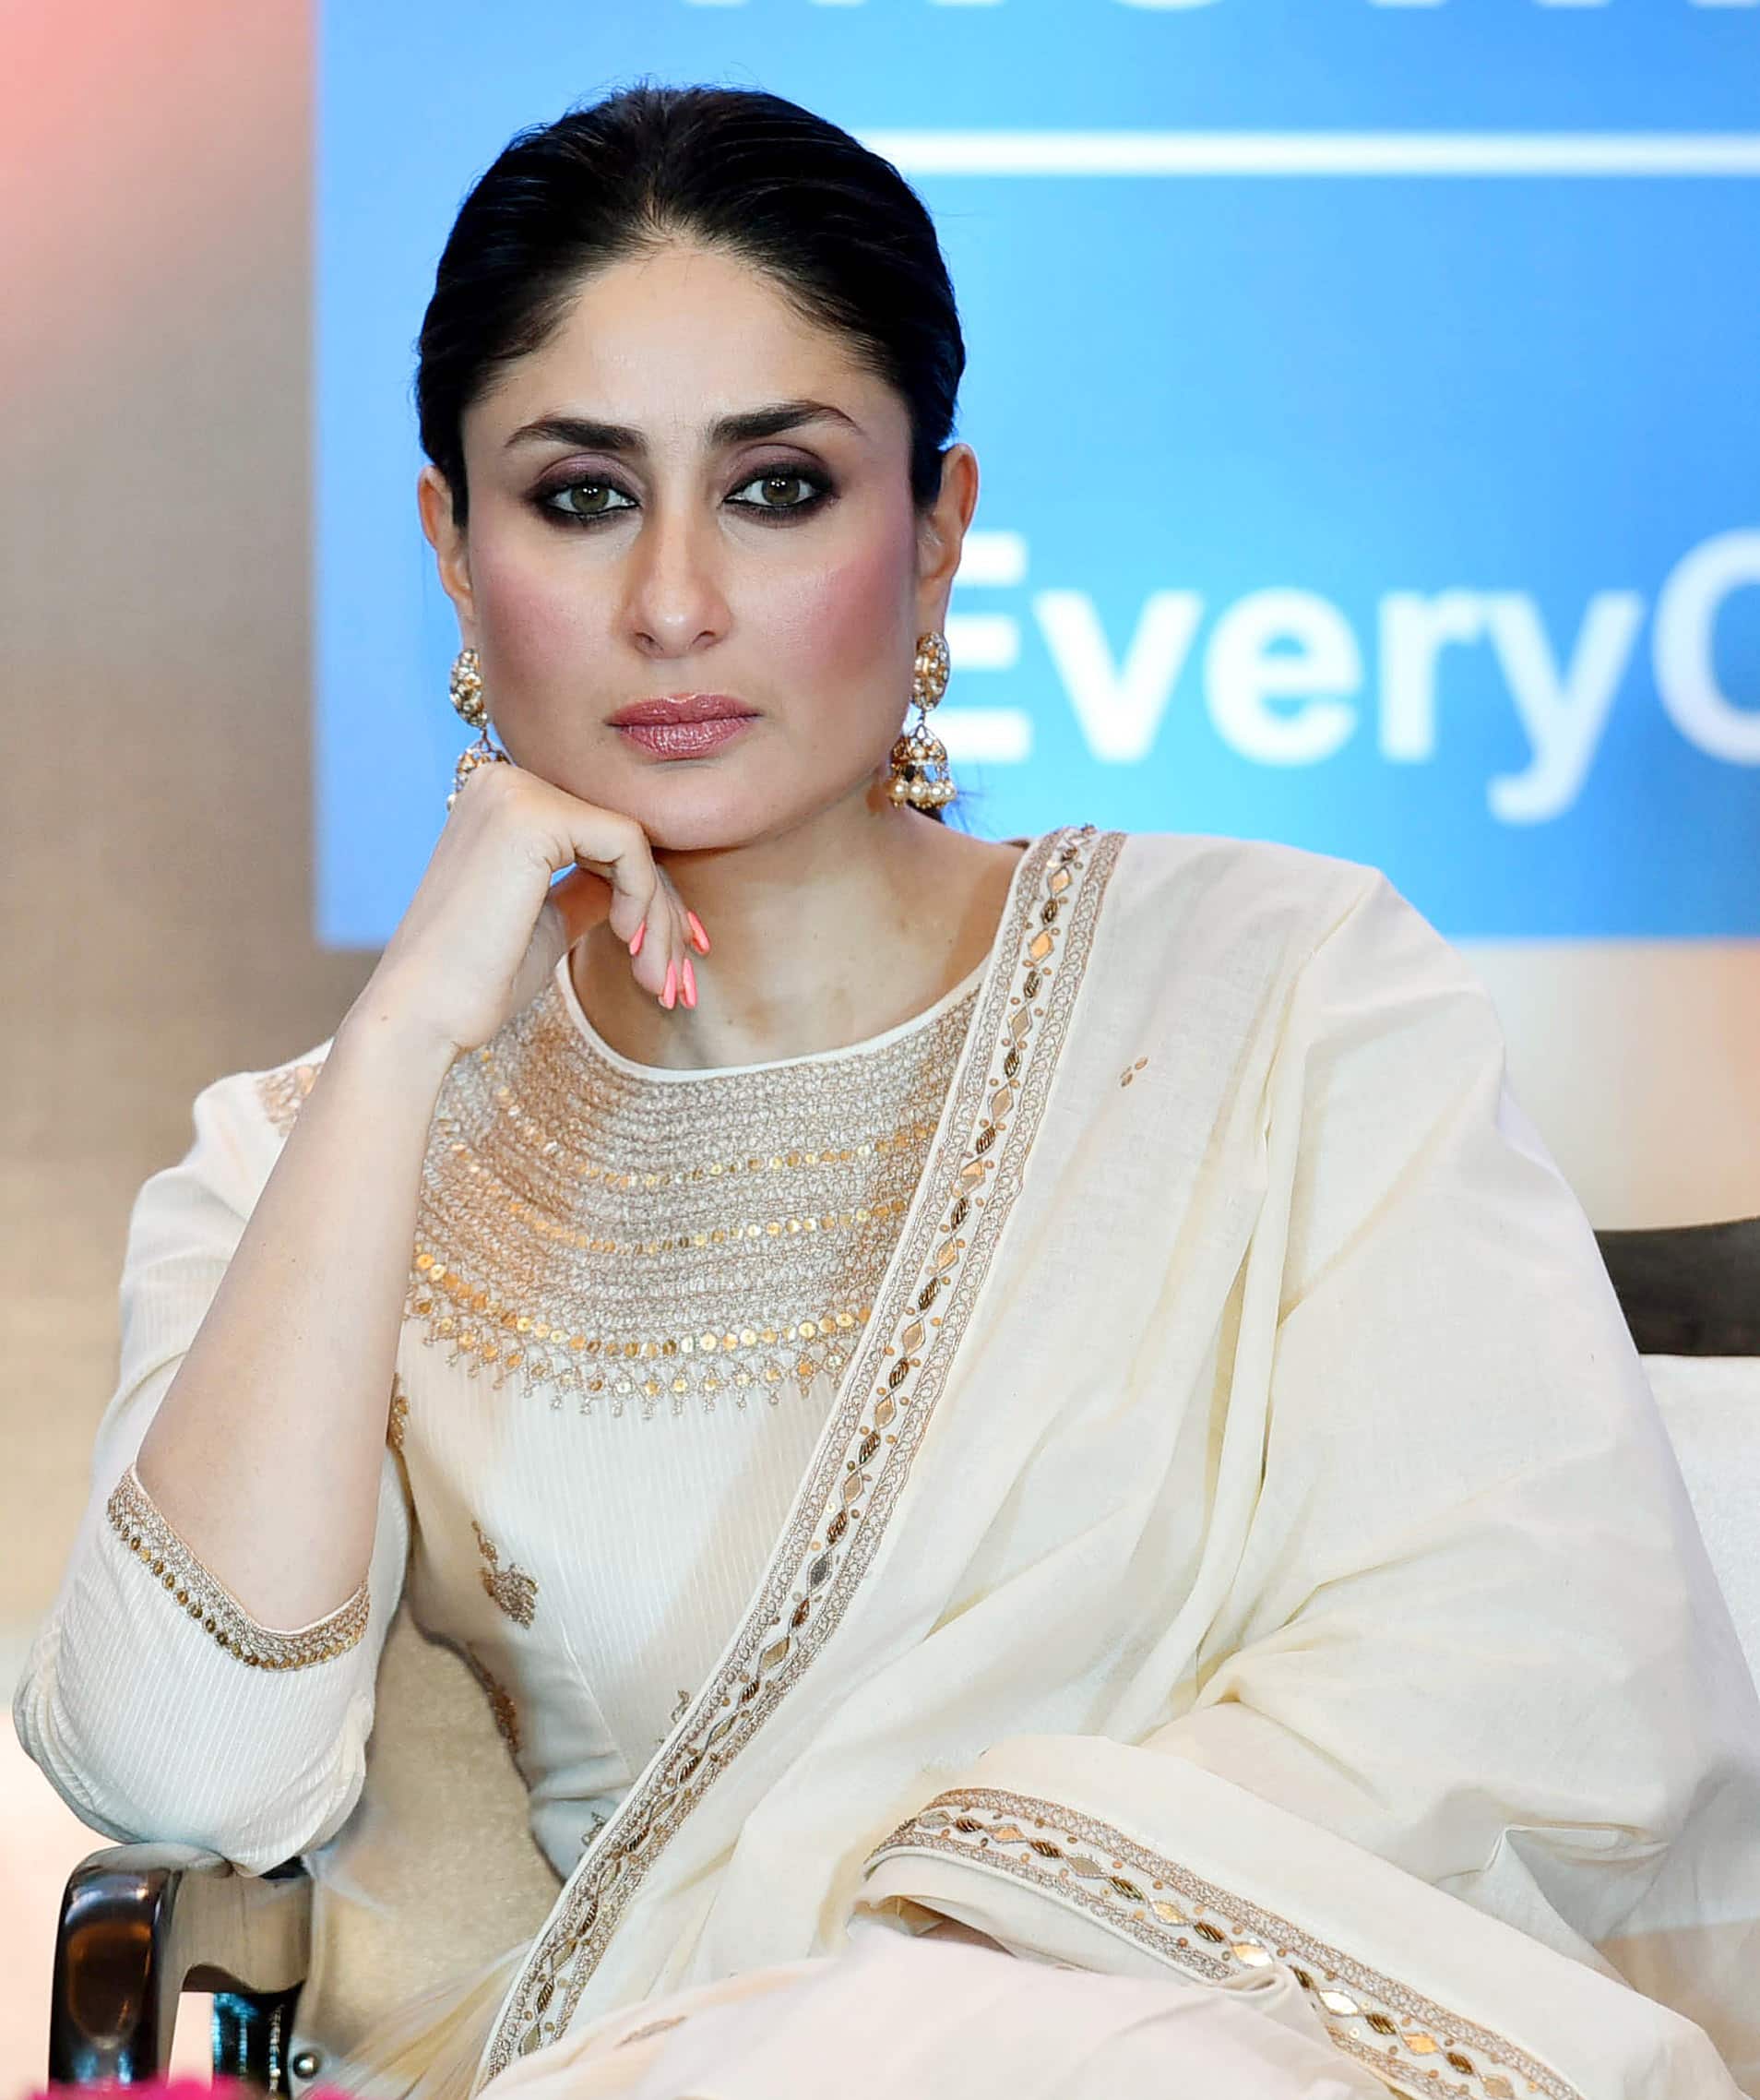 Kareena Kapoor Khan gives a royal feel in ethnic wear at UNICEF event